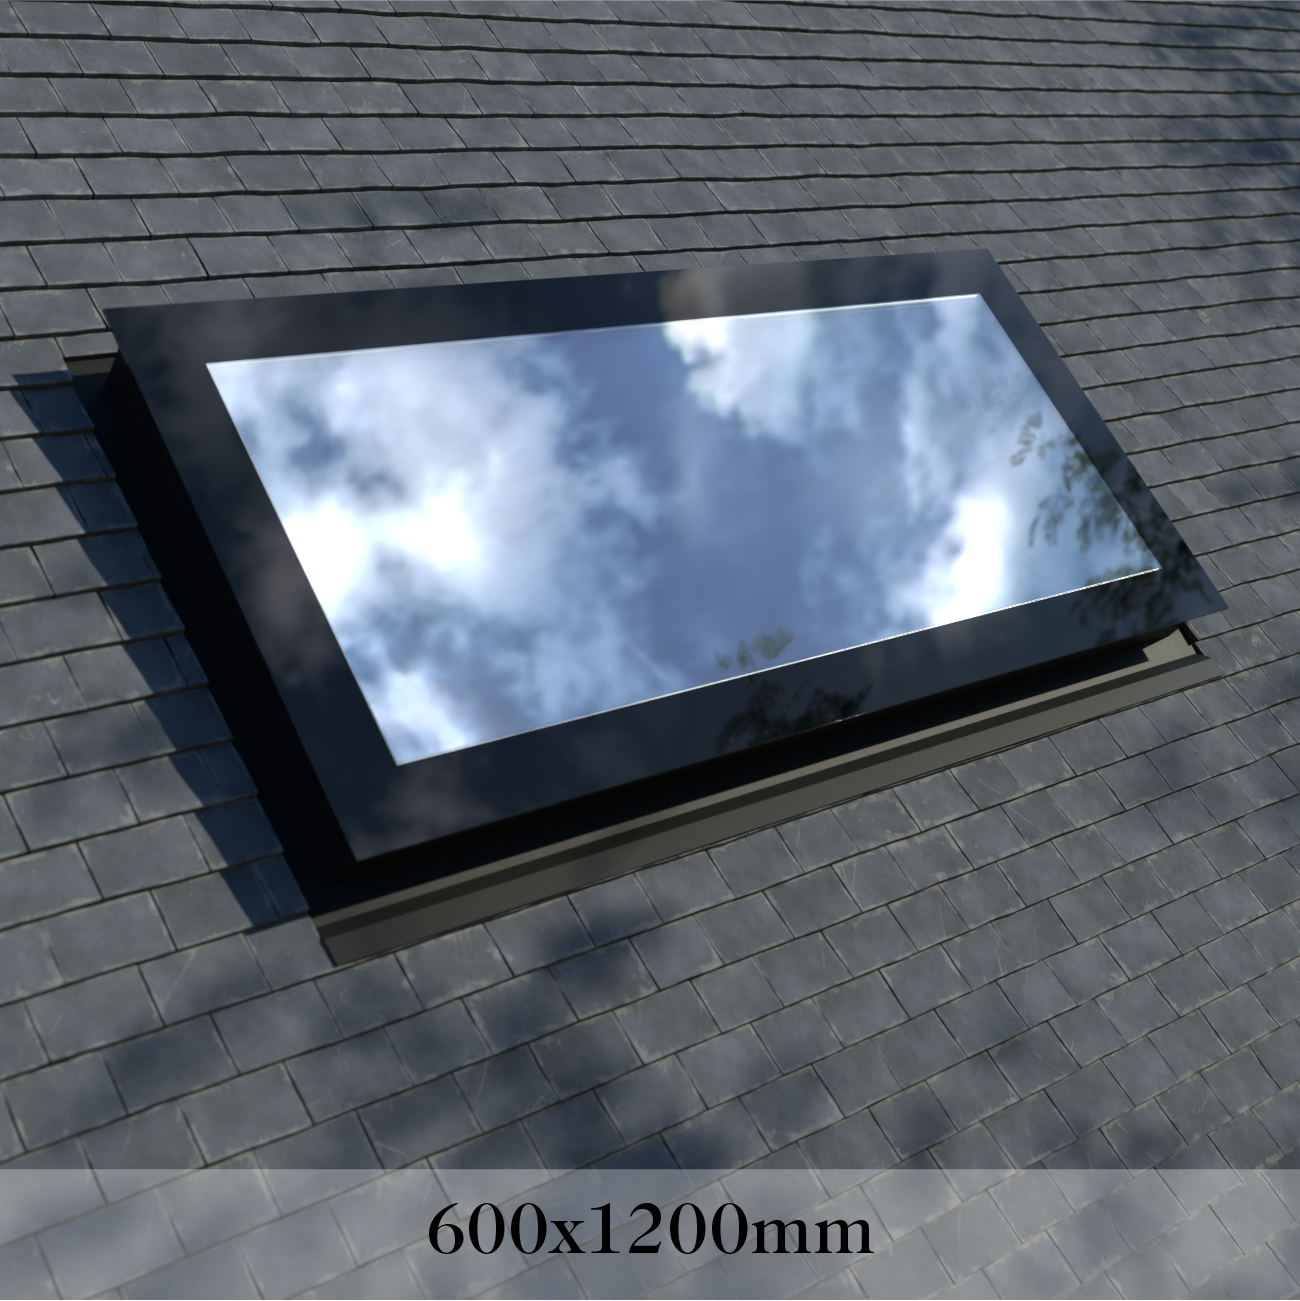 Pitched Roof Skylight 600 x 1200 mm